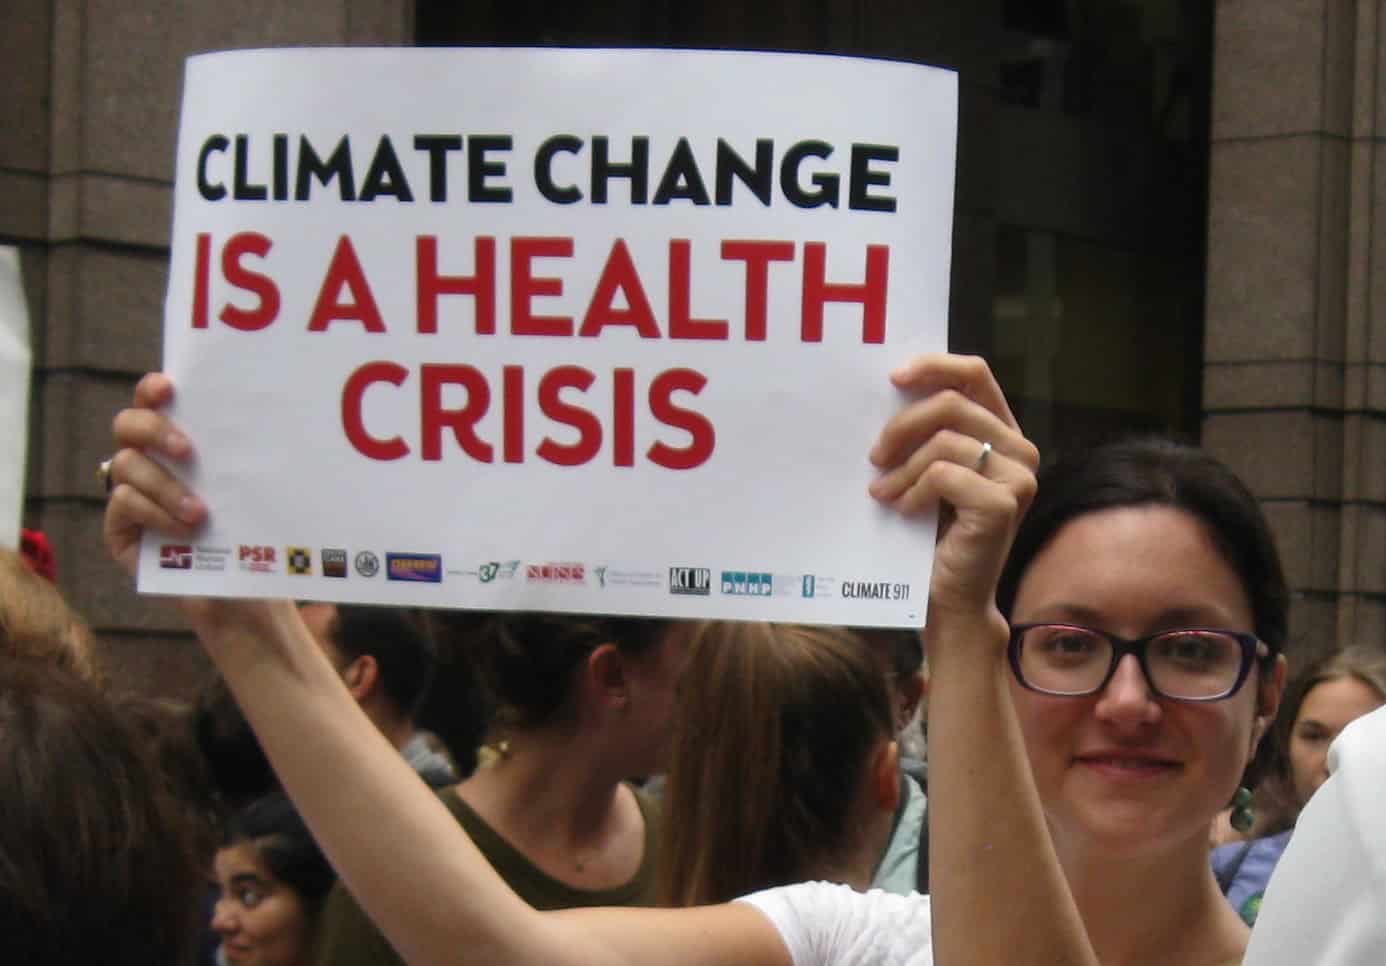 Dr. Lauren Zajac holding sign: "Climate Change Is a Health Crisis"